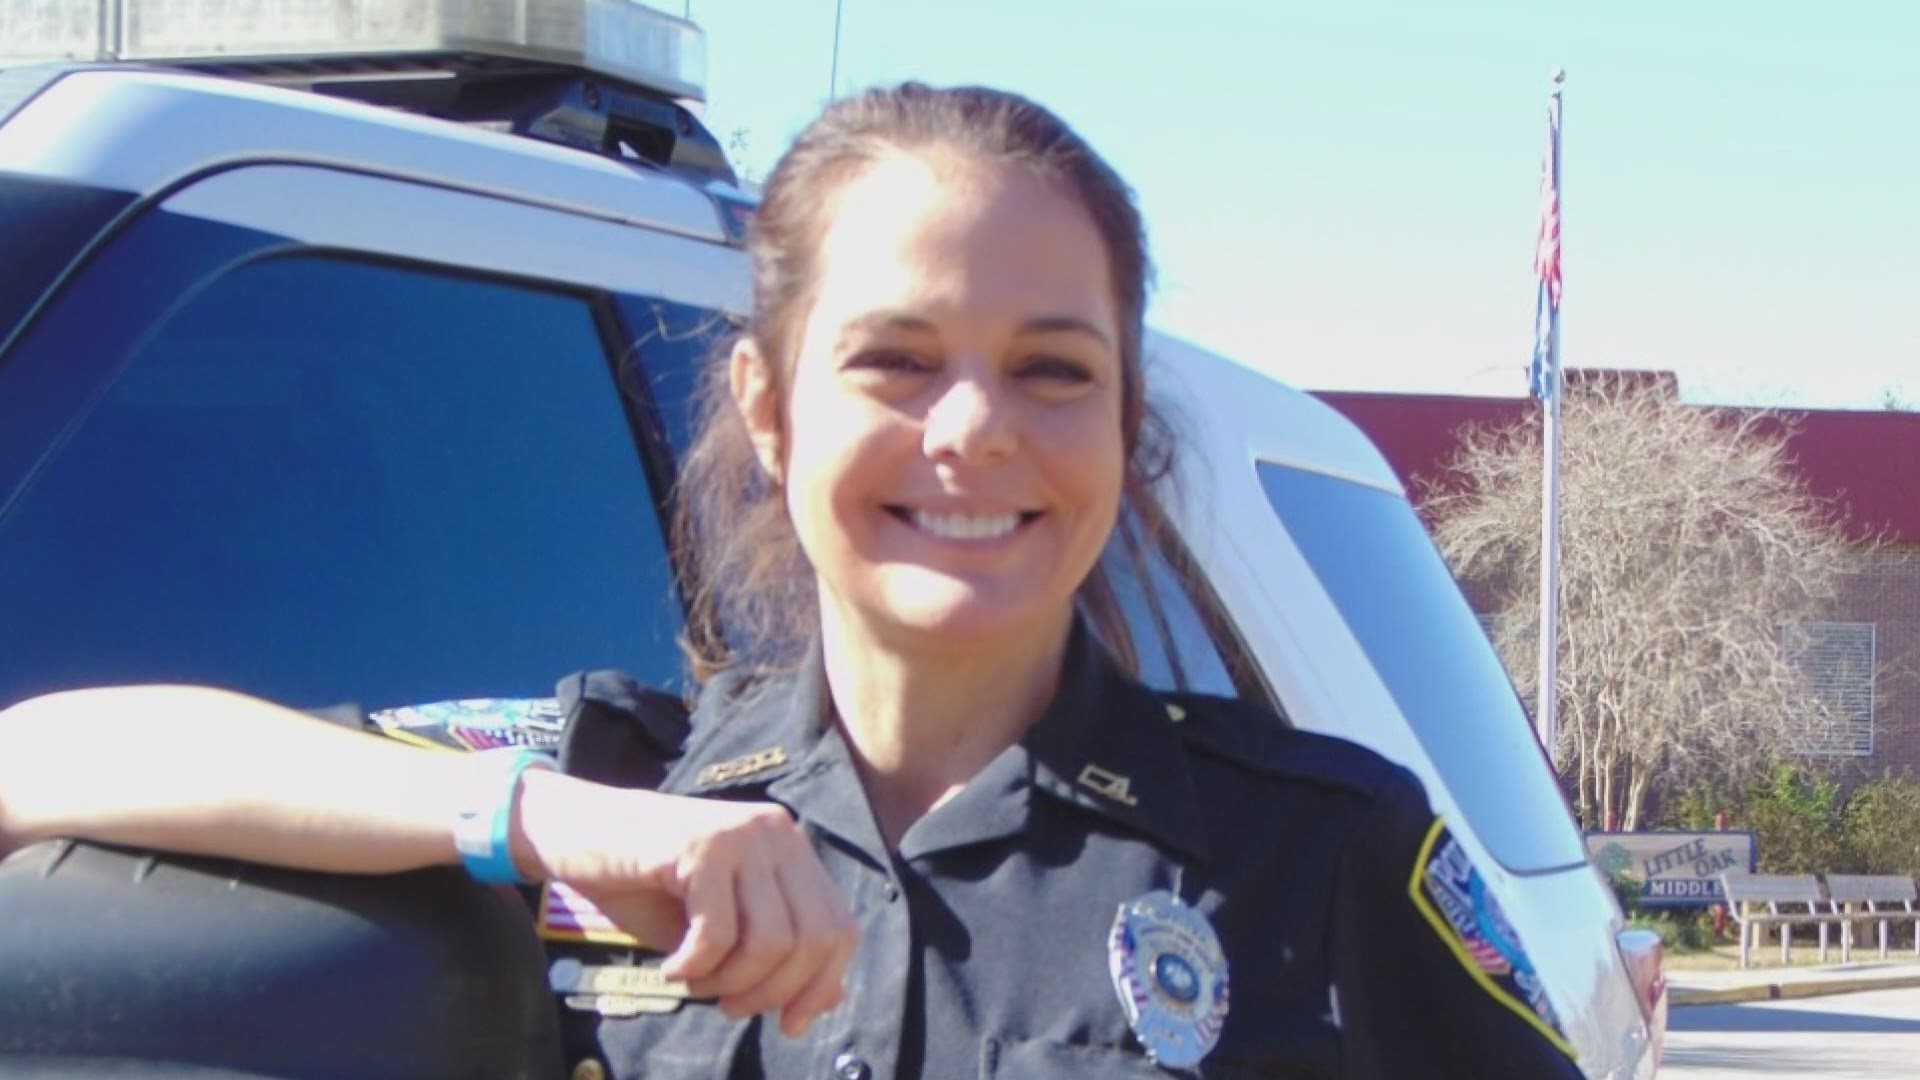 Officer Simon was working Sunday afternoon when she suffered a fatal heart attack.